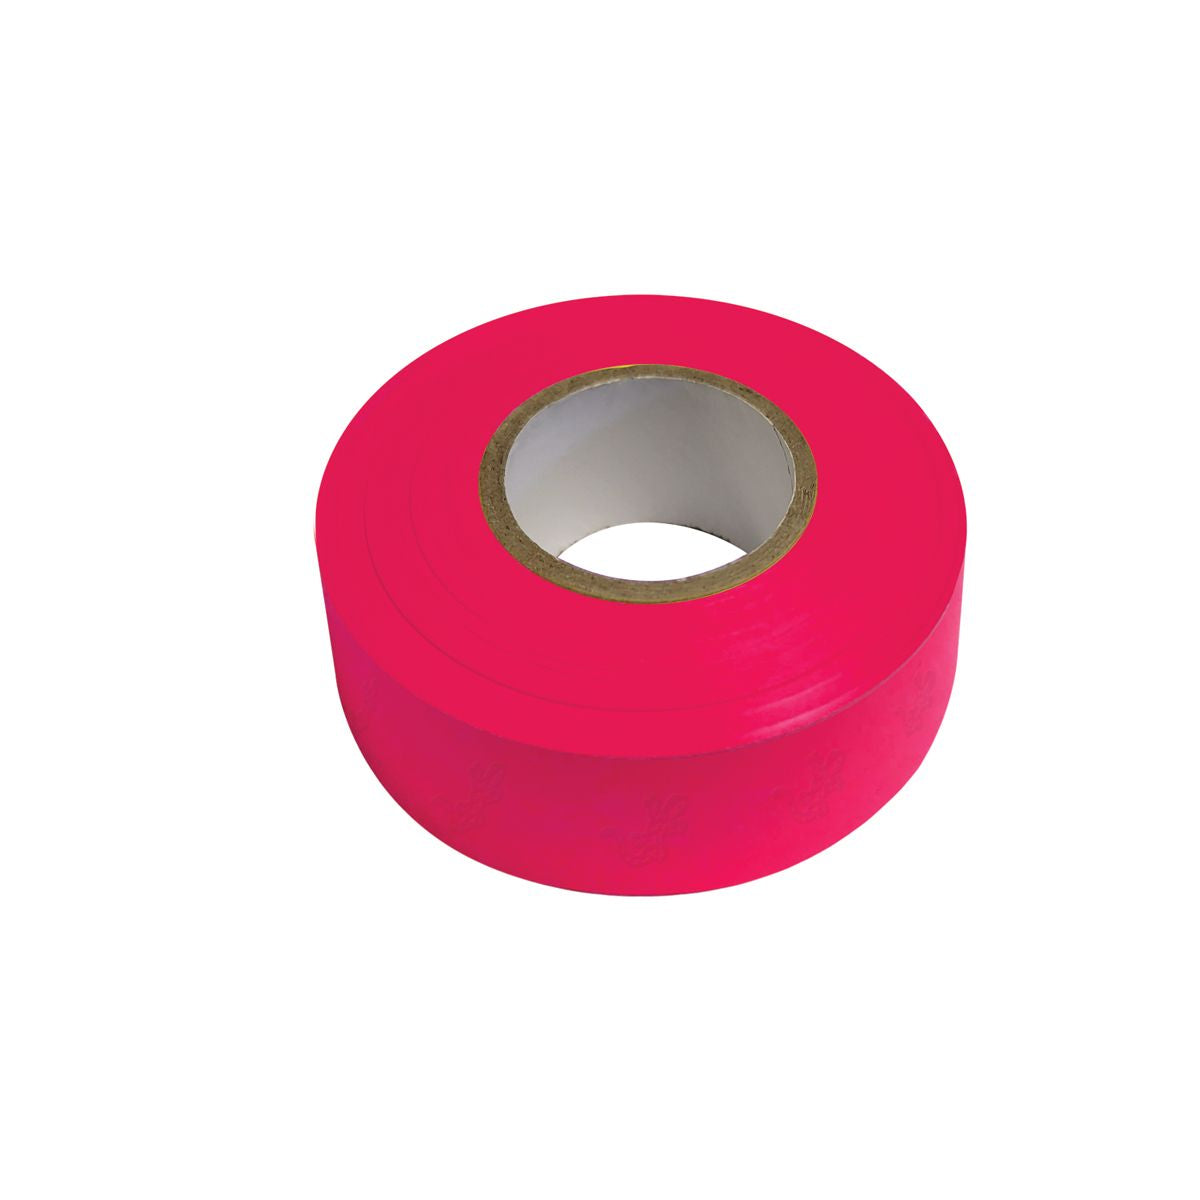 SitePro 19-FTP-RG Flagging Tape - Red Glo